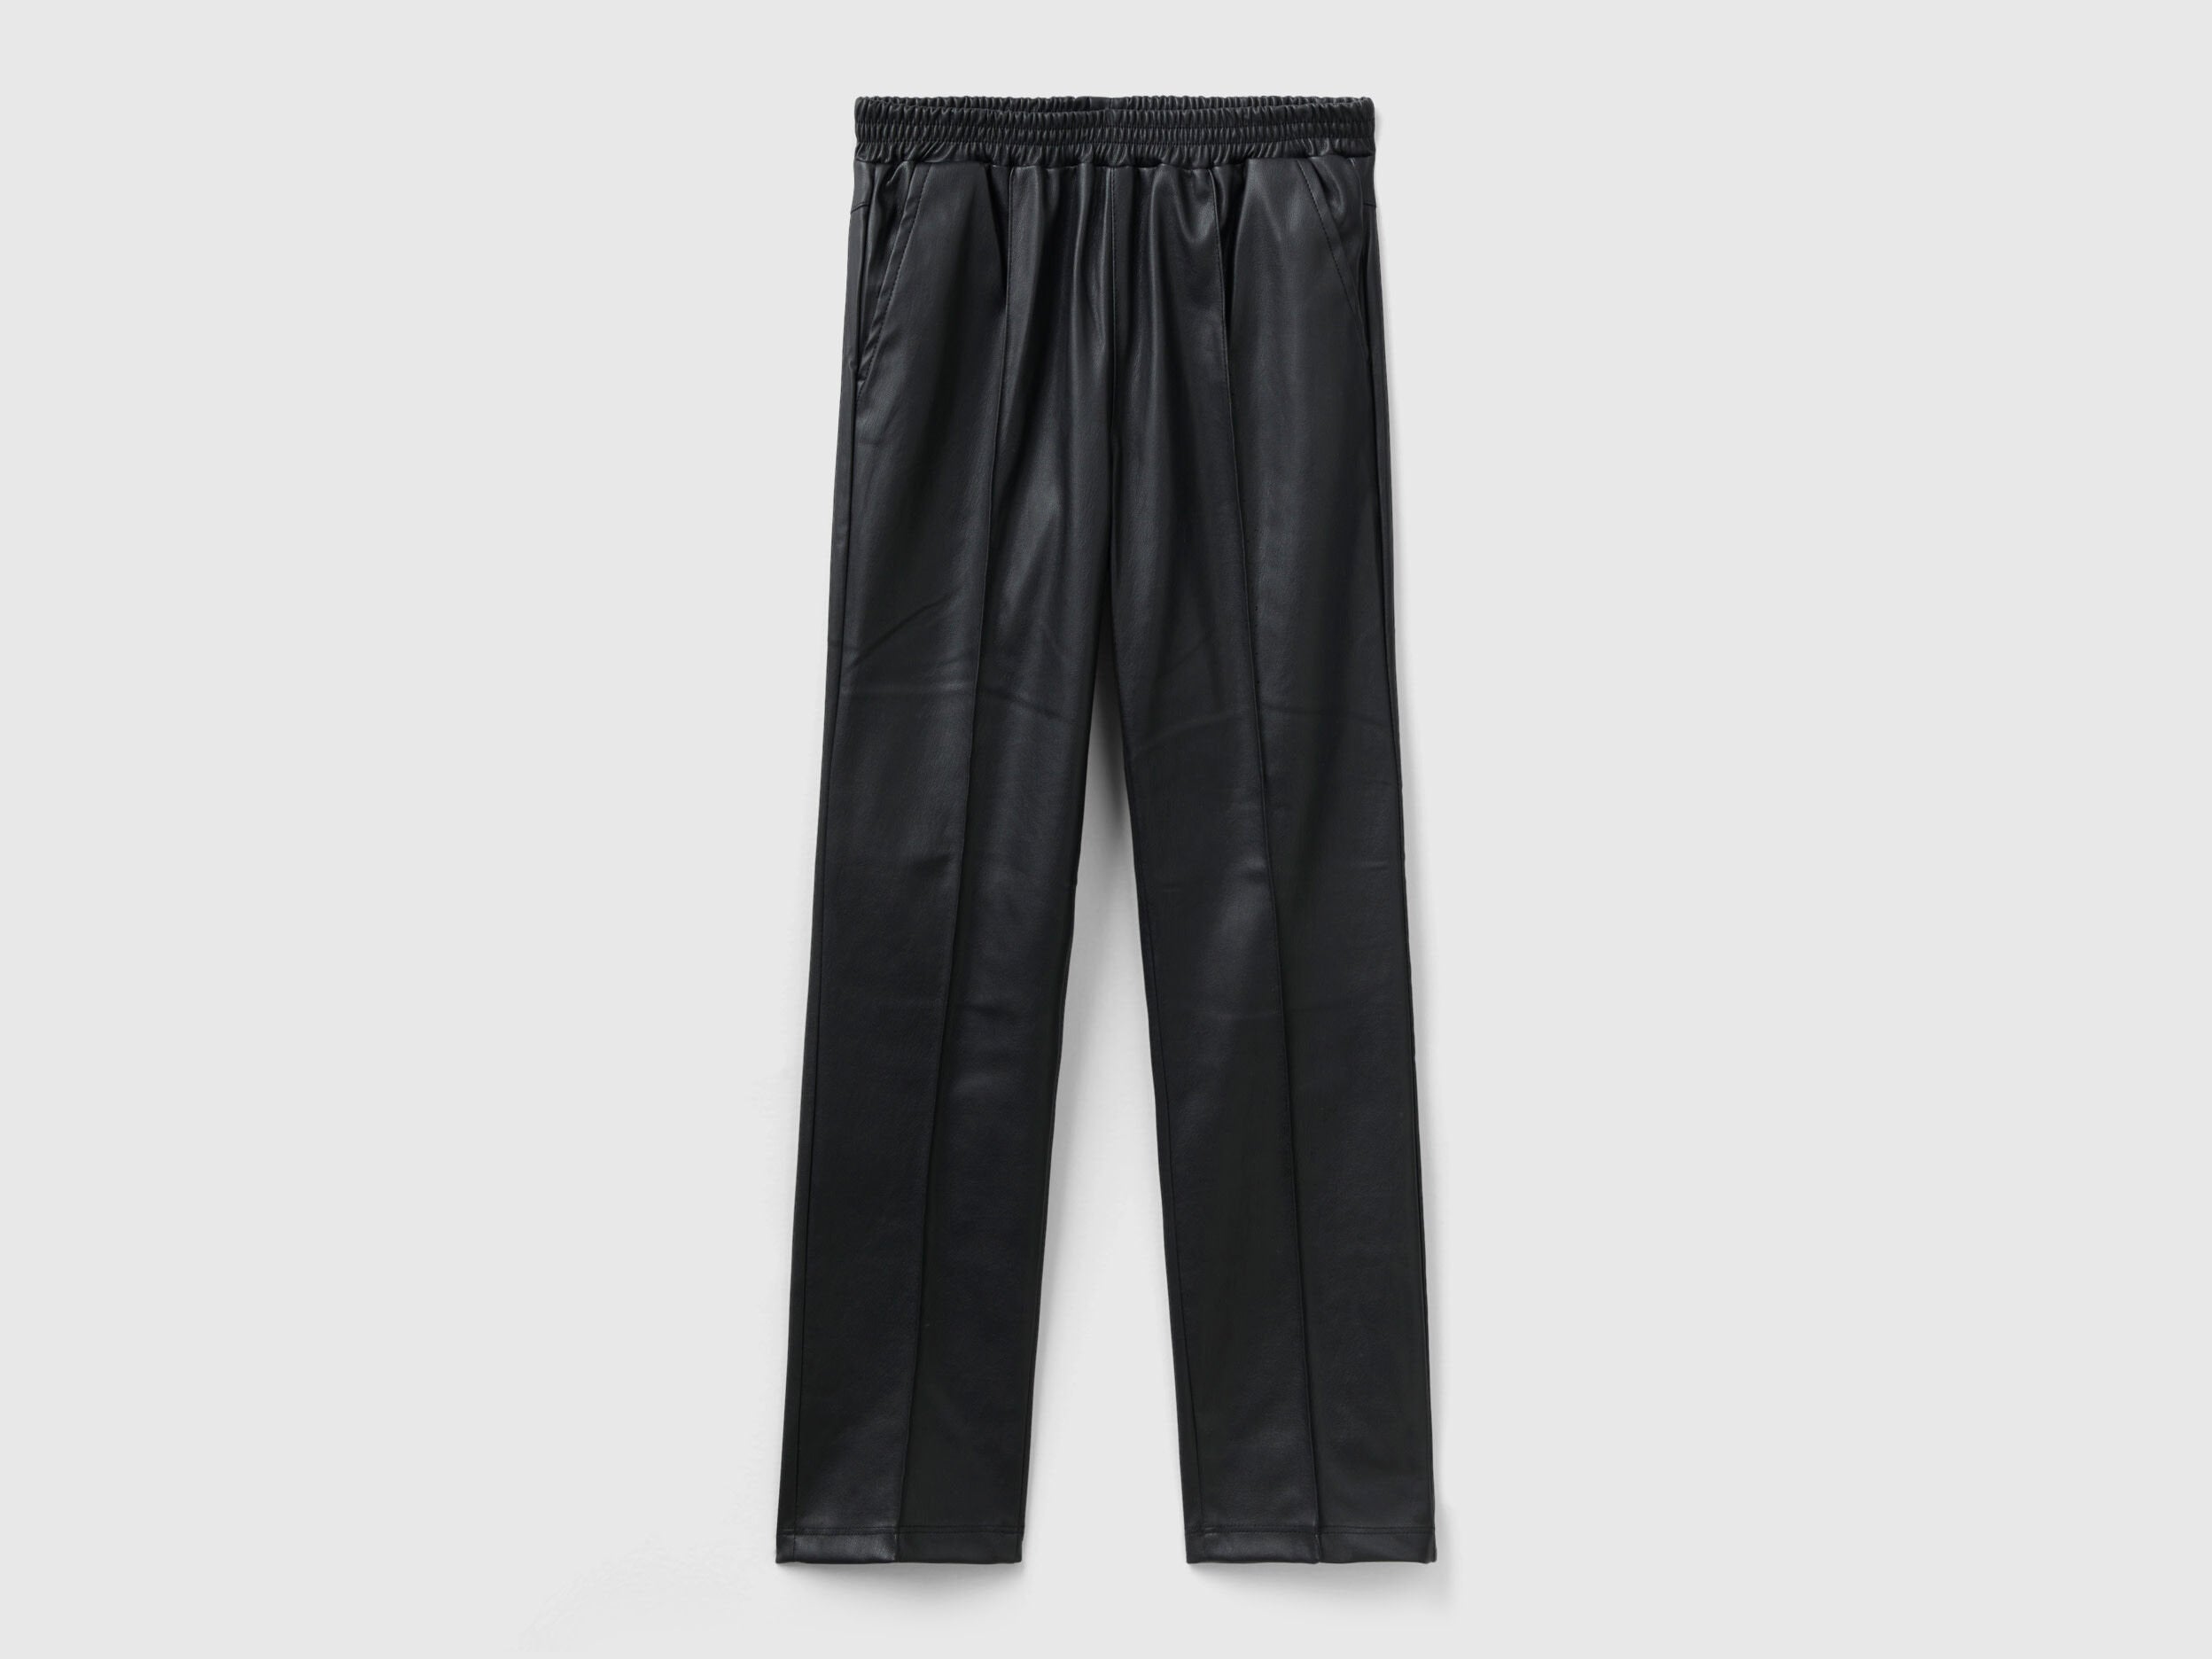 Slim Fit Trousers In Imitation Leather Fabric_4VF8CF027_100_01